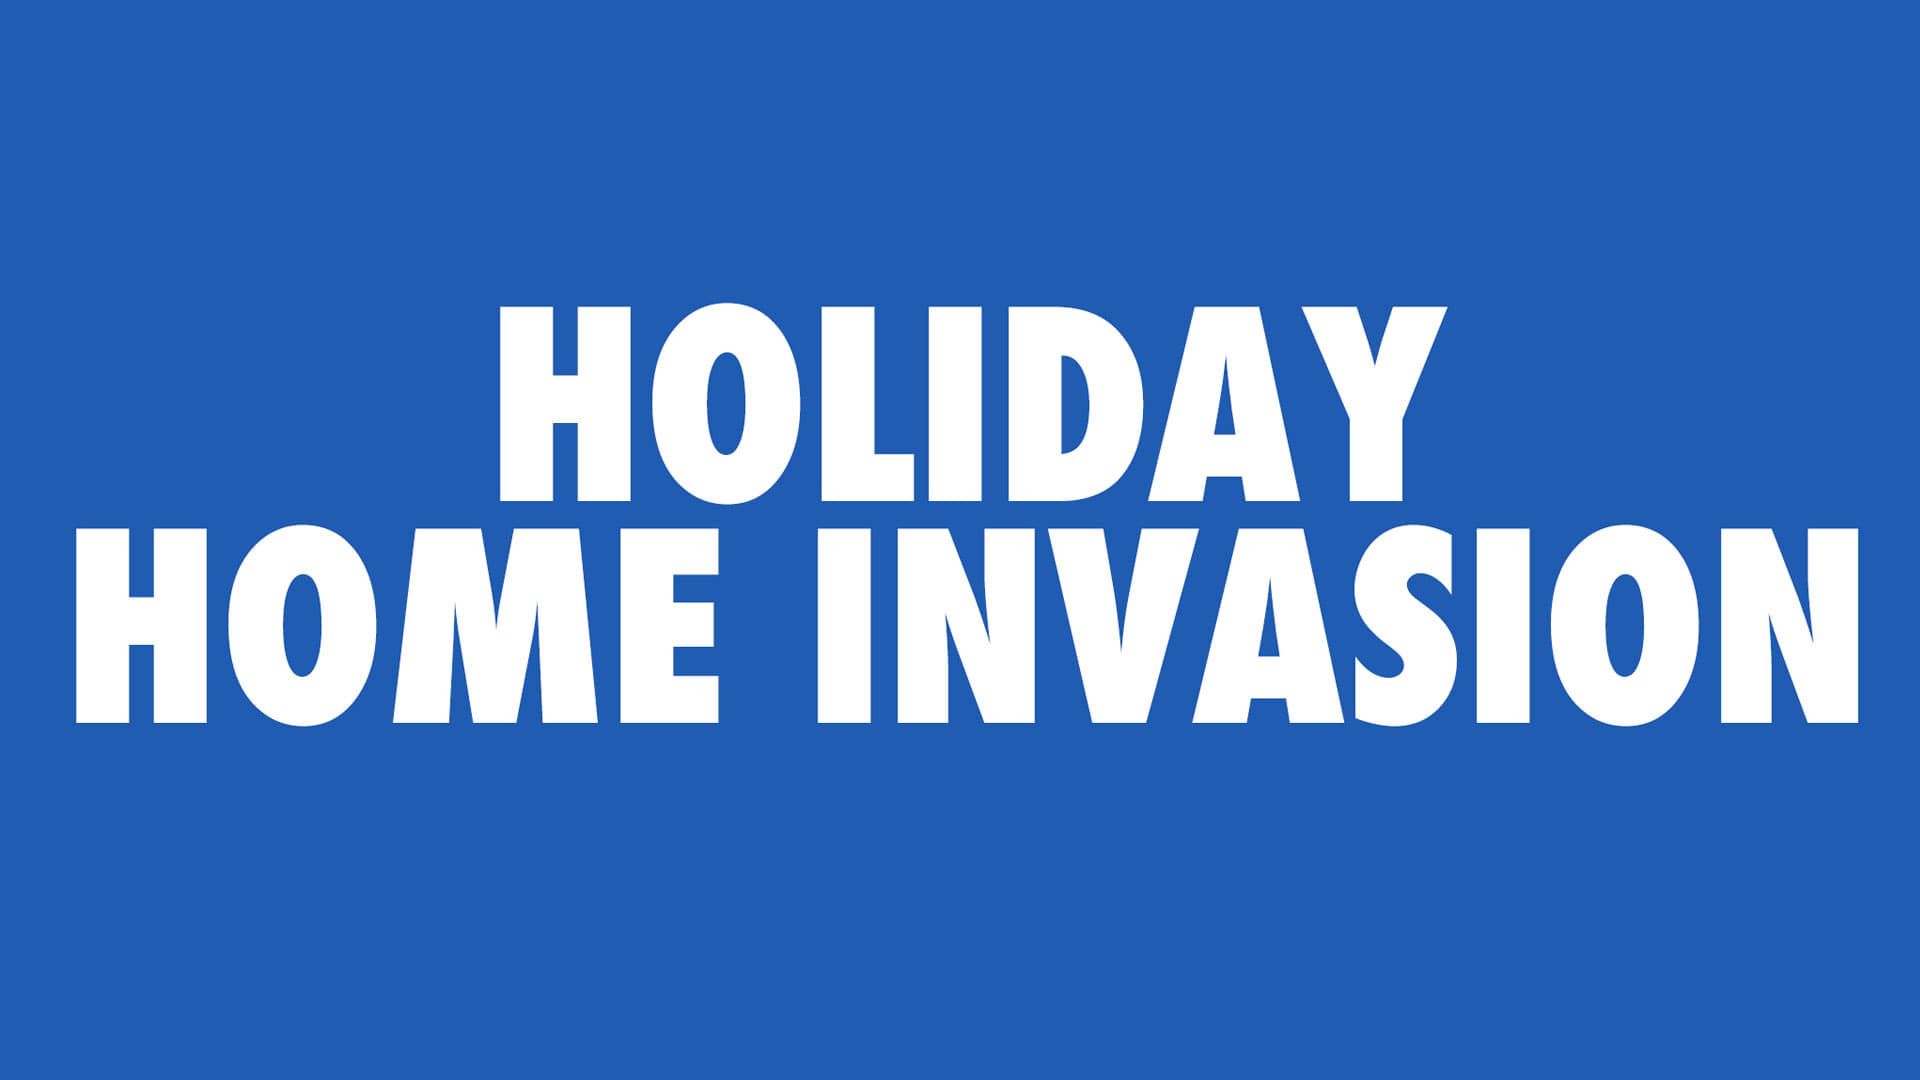 Holiday Home Invasion background